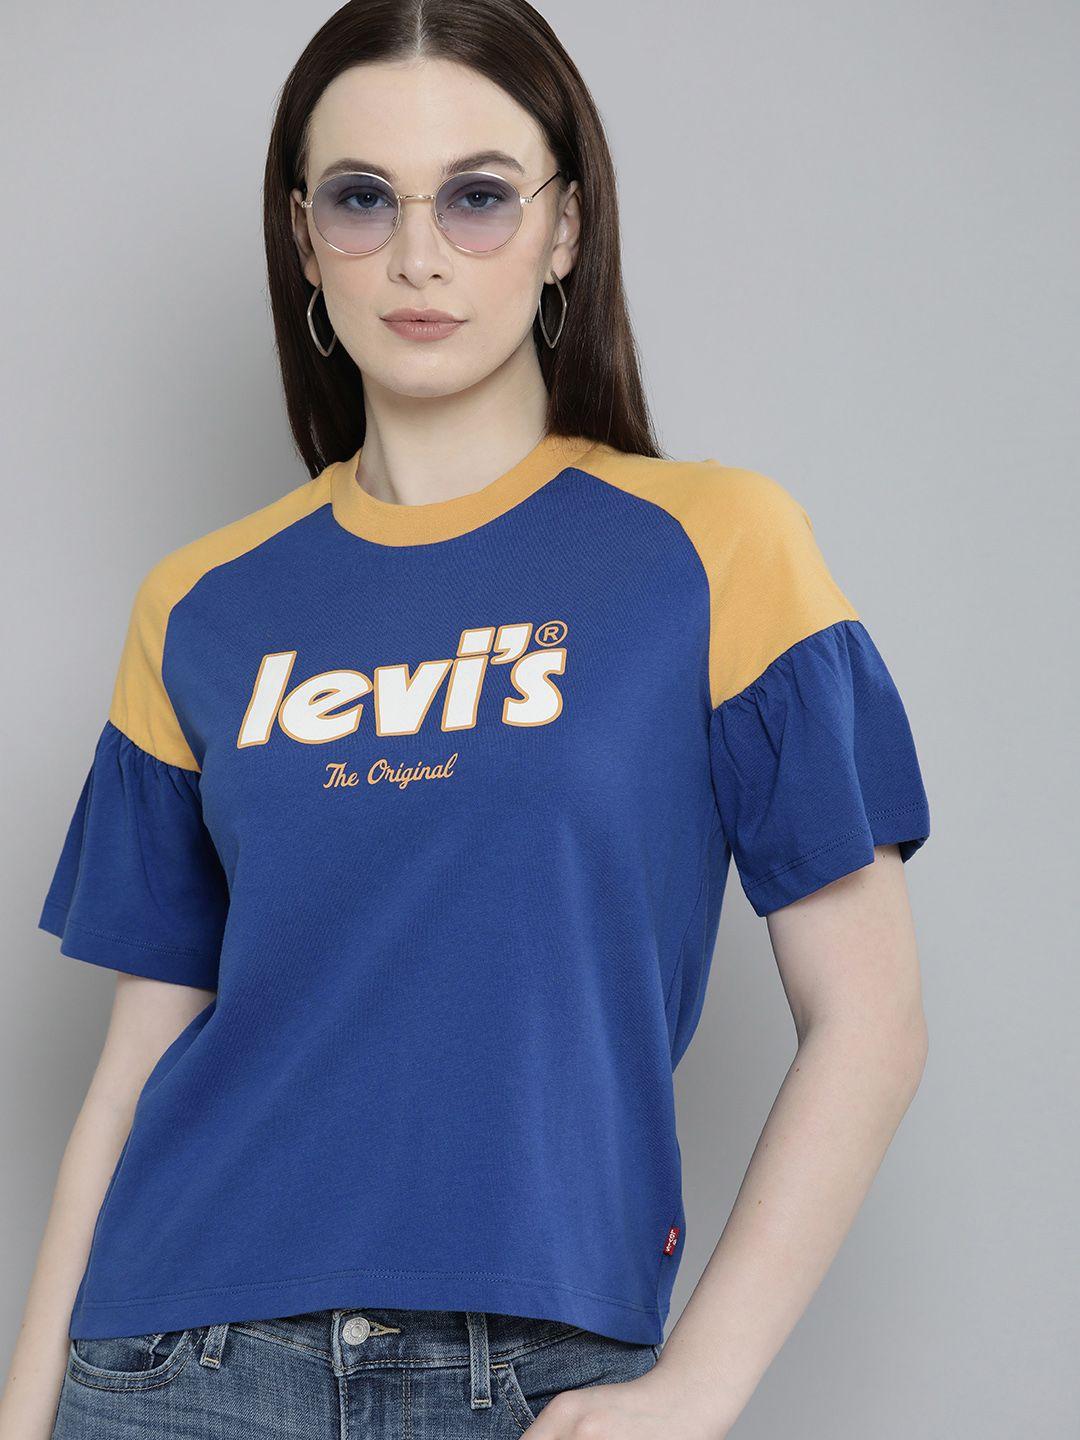 levis pure cotton brand logo printed flared sleeves top